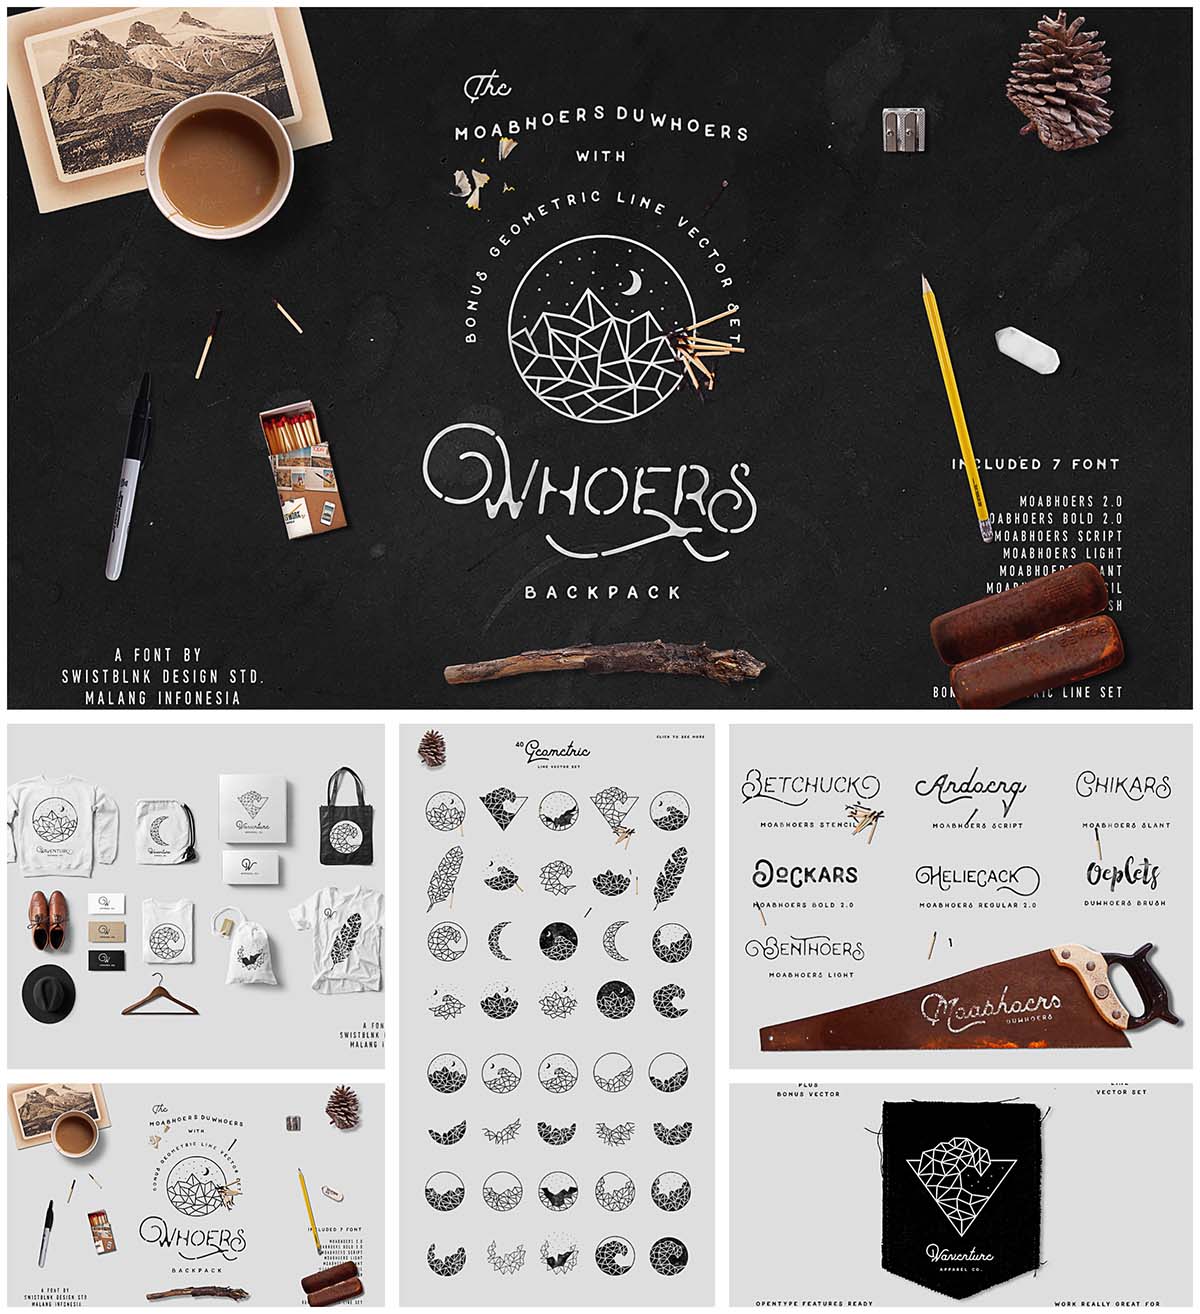 Moabhoers Duwhoers font pack with bonus